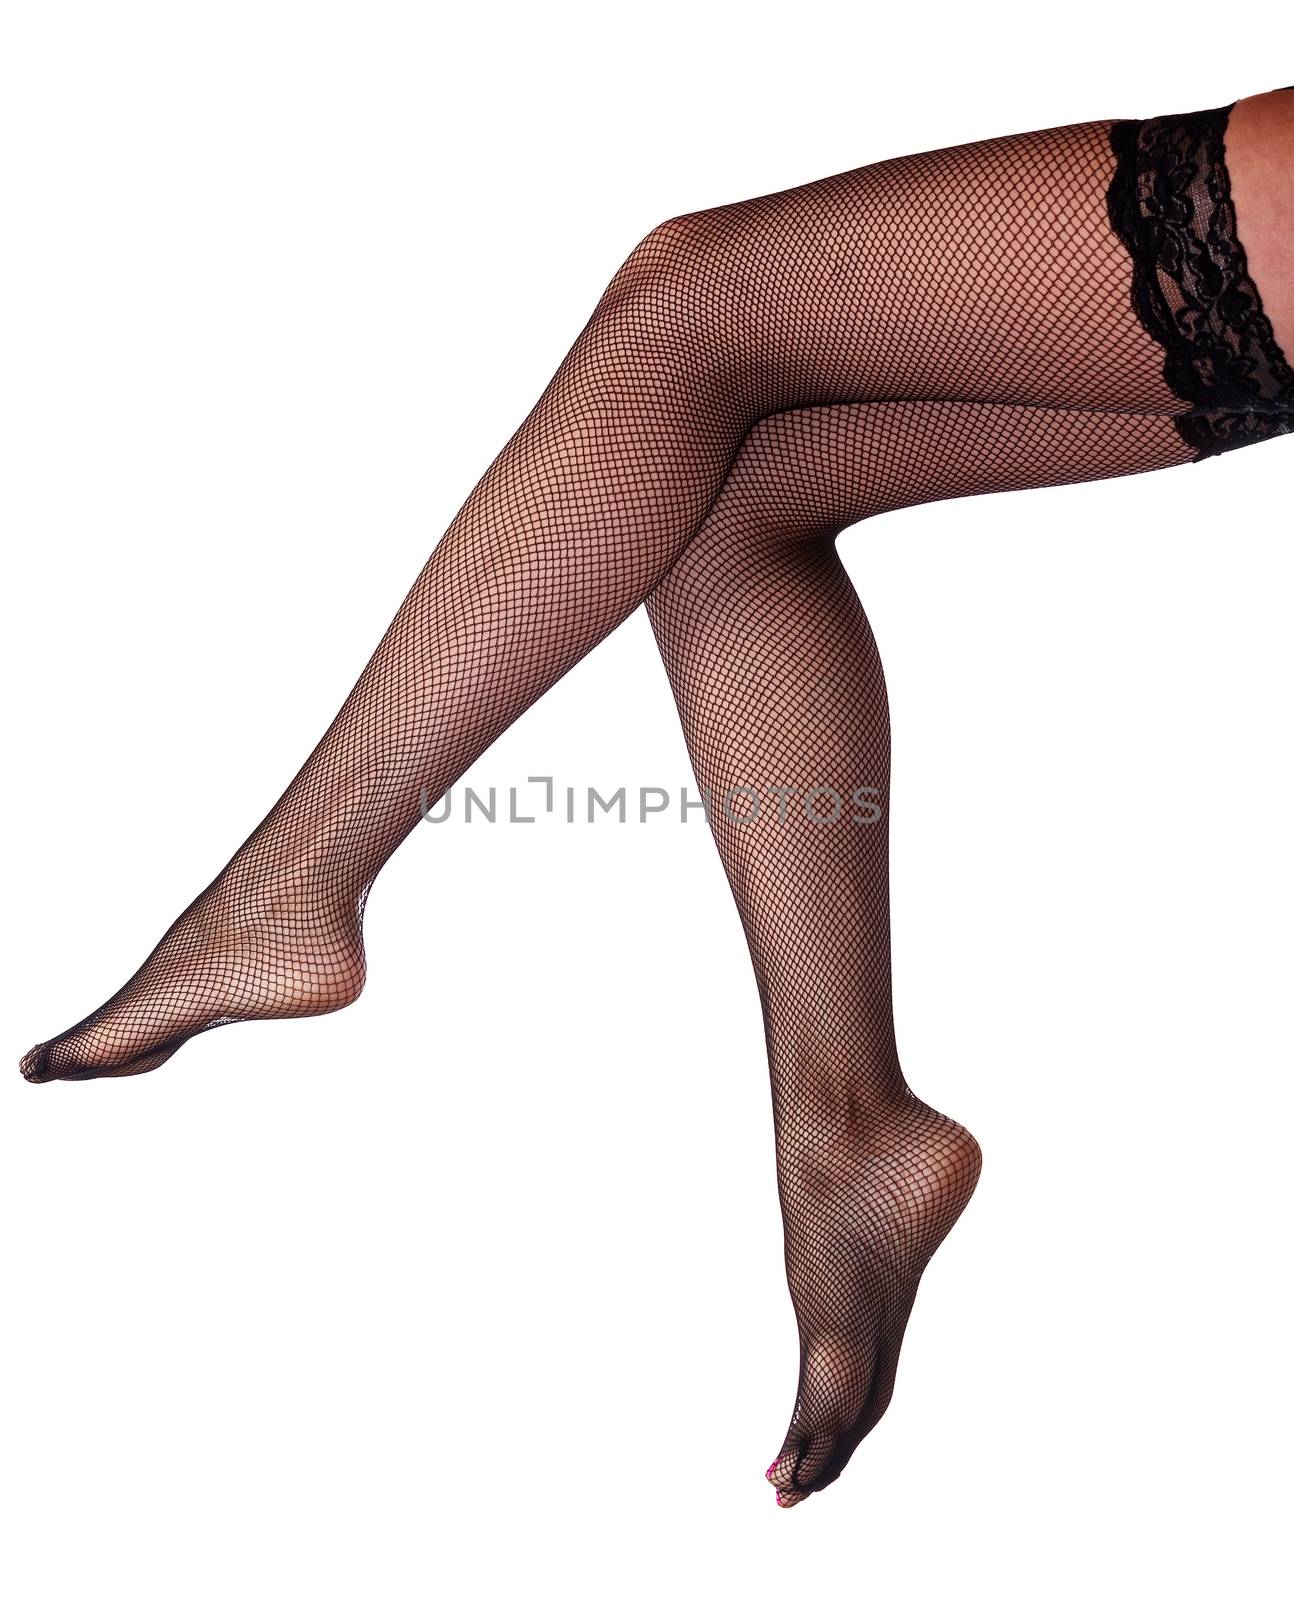 Beautiful long woman's legs in black net pantyhose, isolated on white background